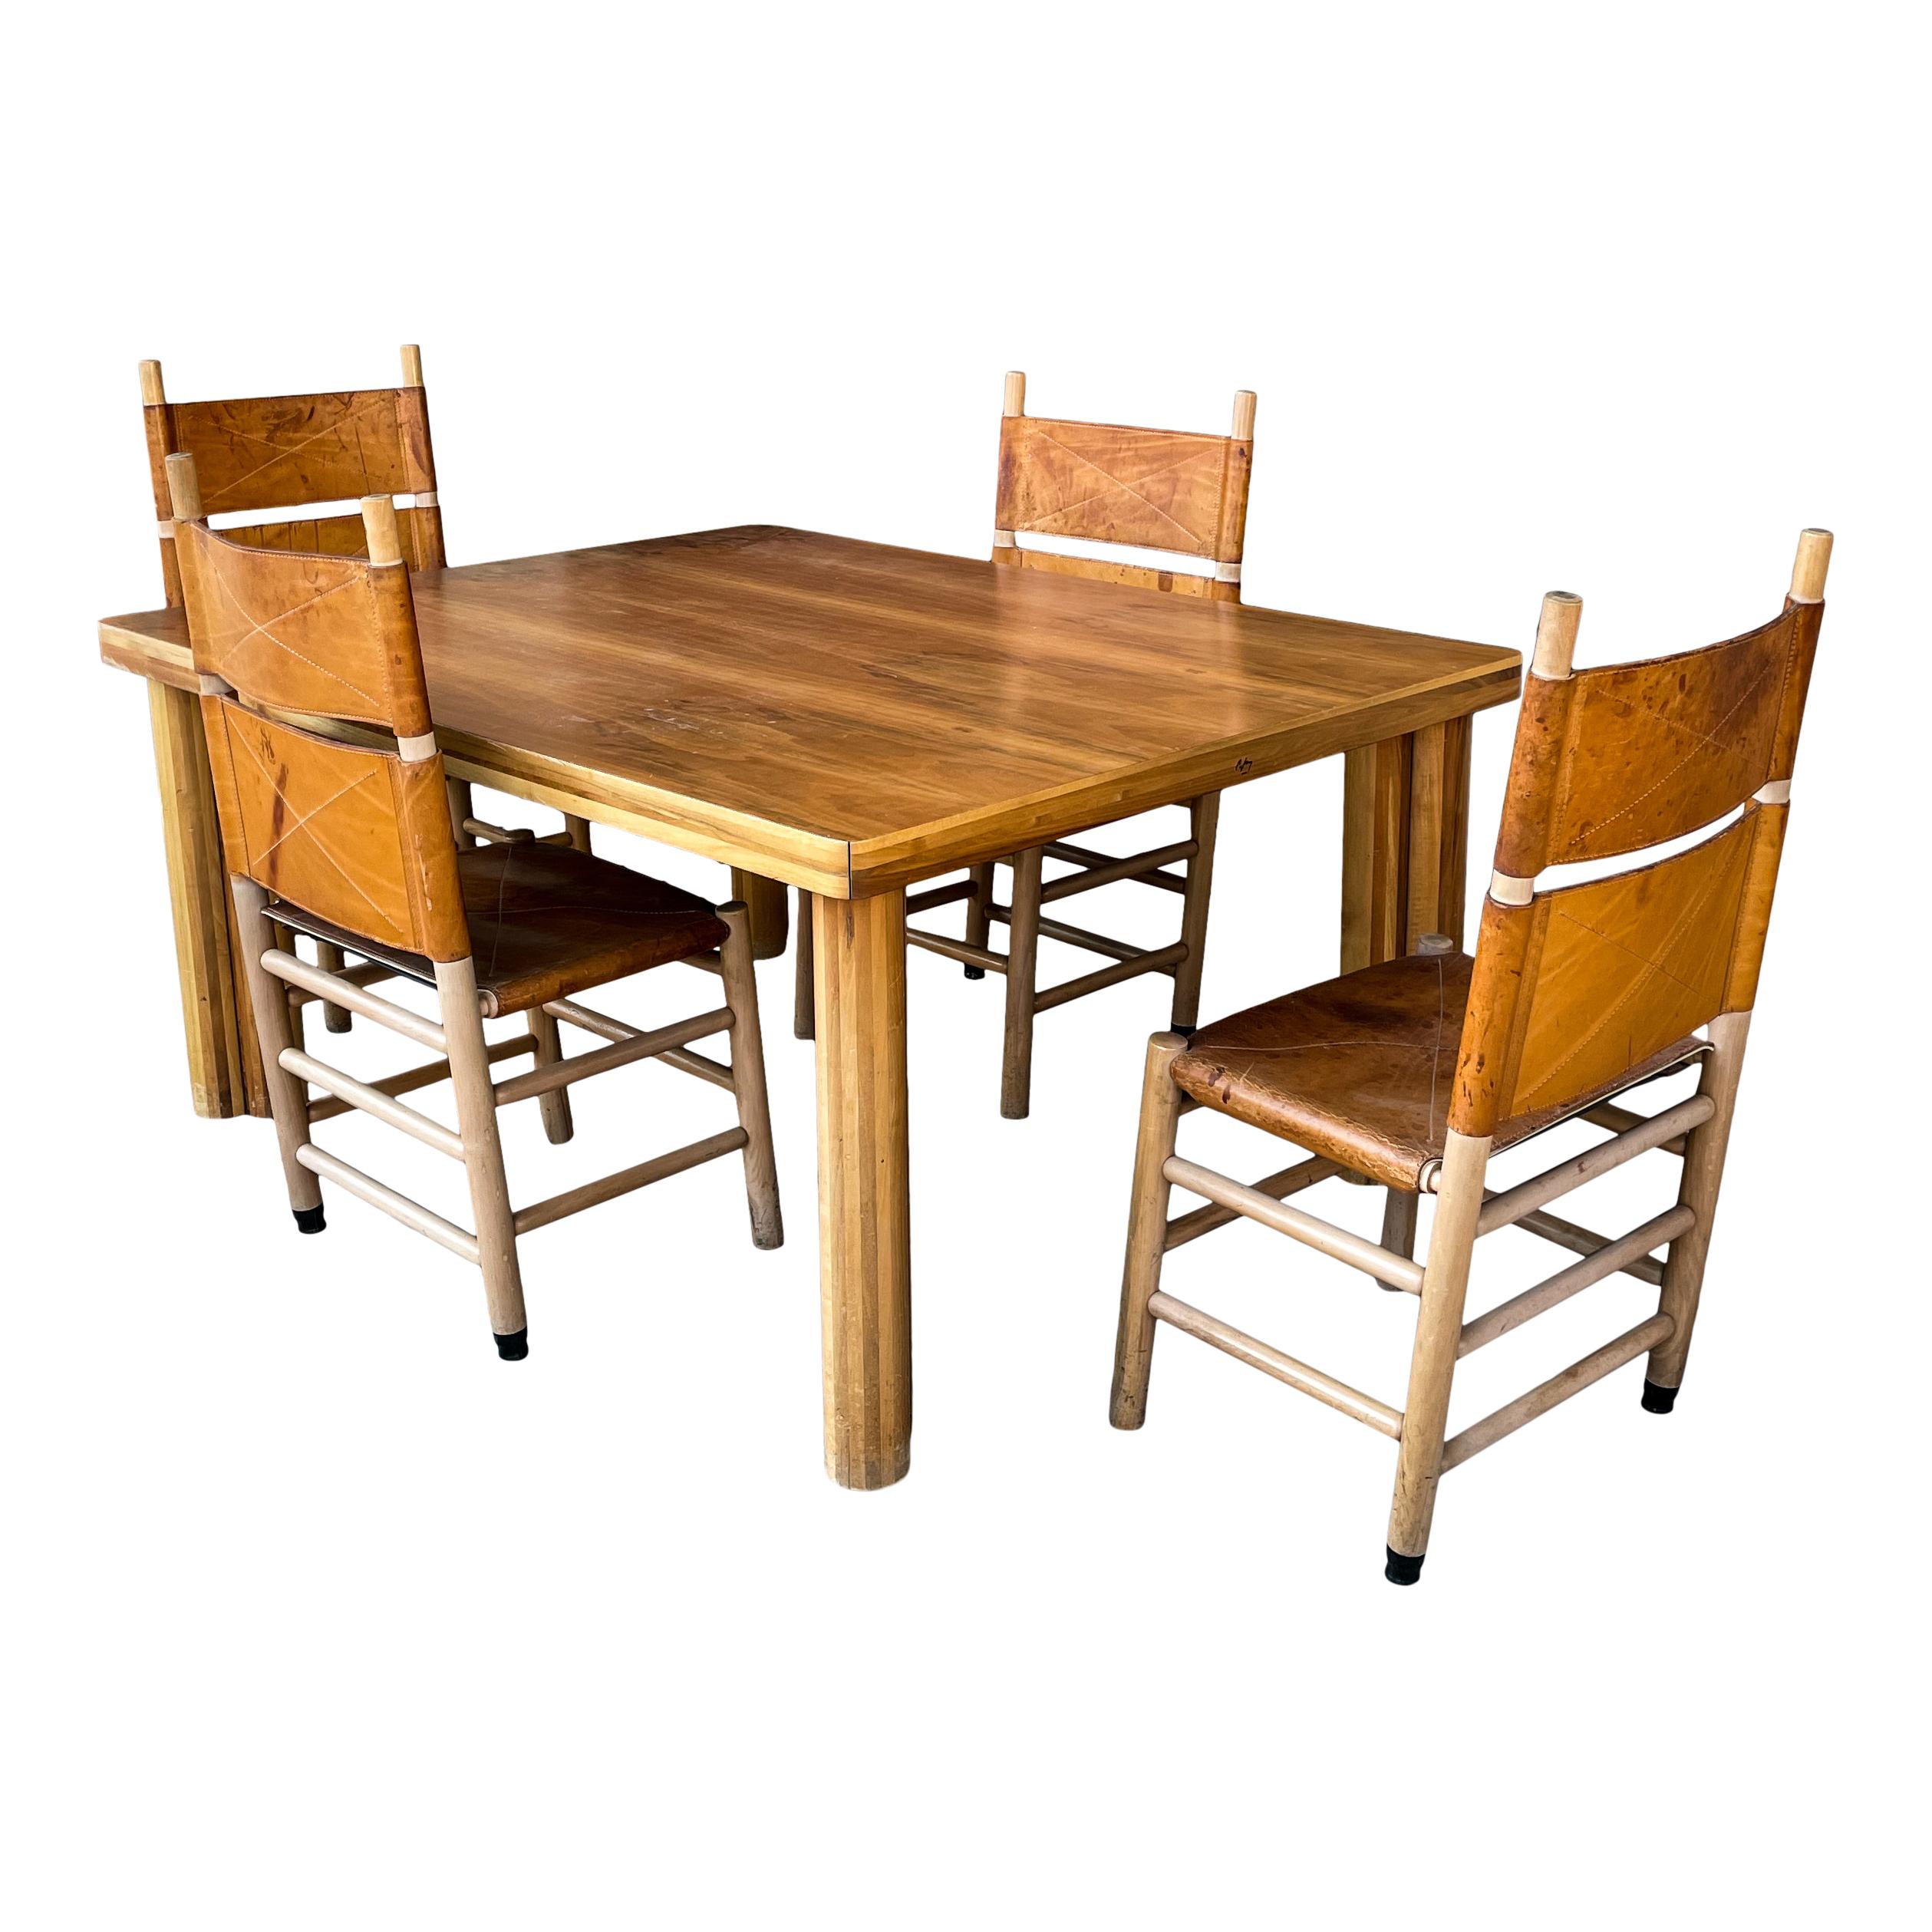 Scuderia dining room set, designed by Carlo Scarpa for the Italian manufacturer Bernini in 1977.

Composed of 5 mod. 783 “Kentucky” dining chairs and one 